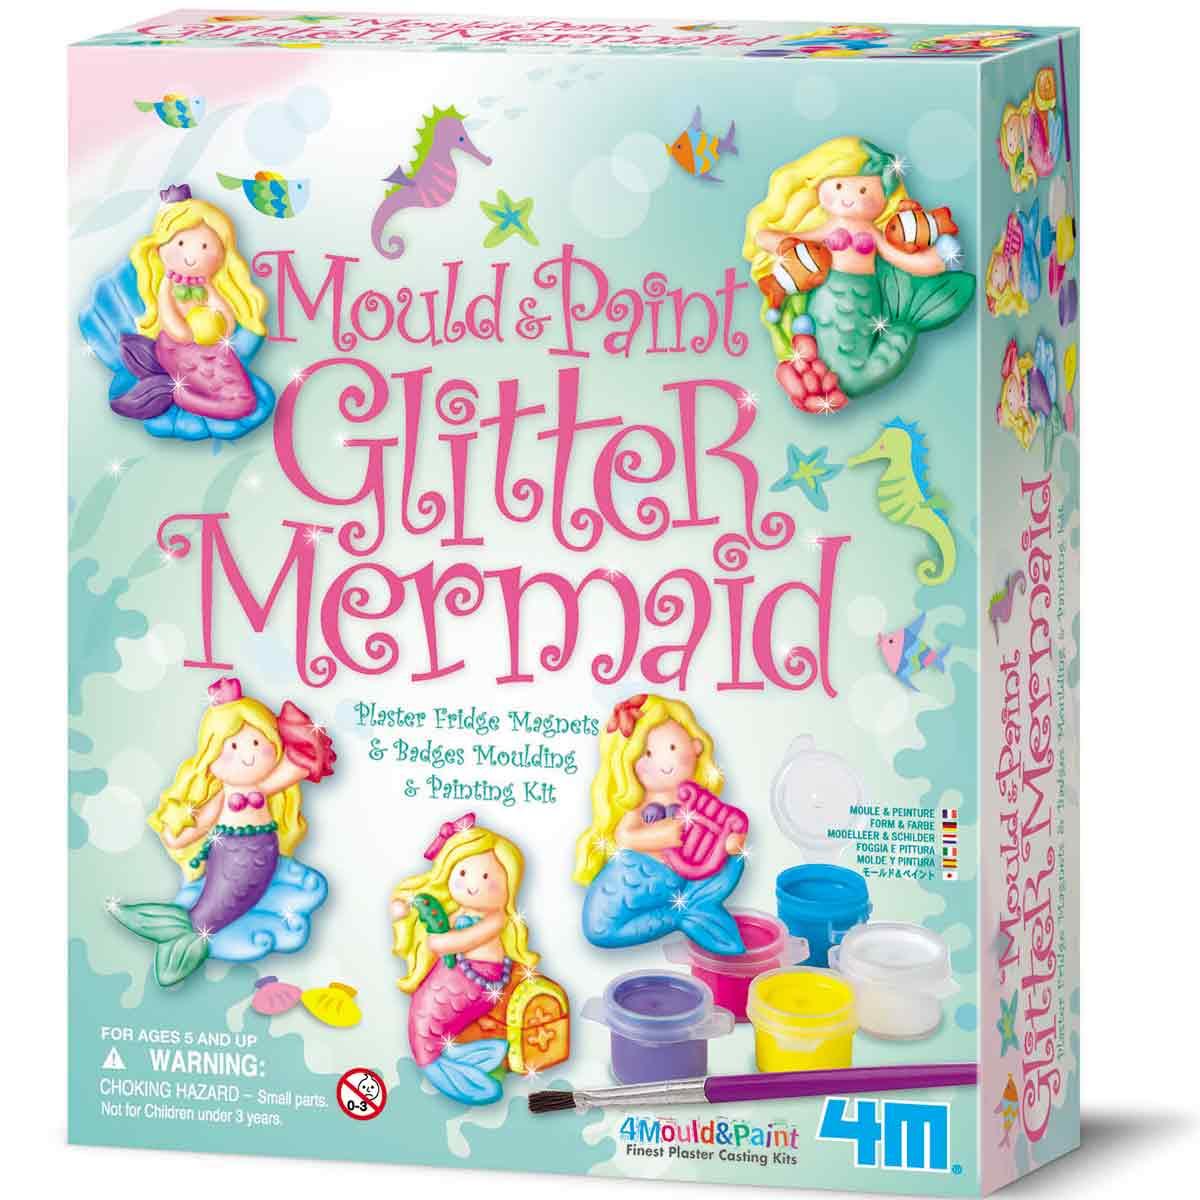 4M Mould and Paint Glitter Mermaid